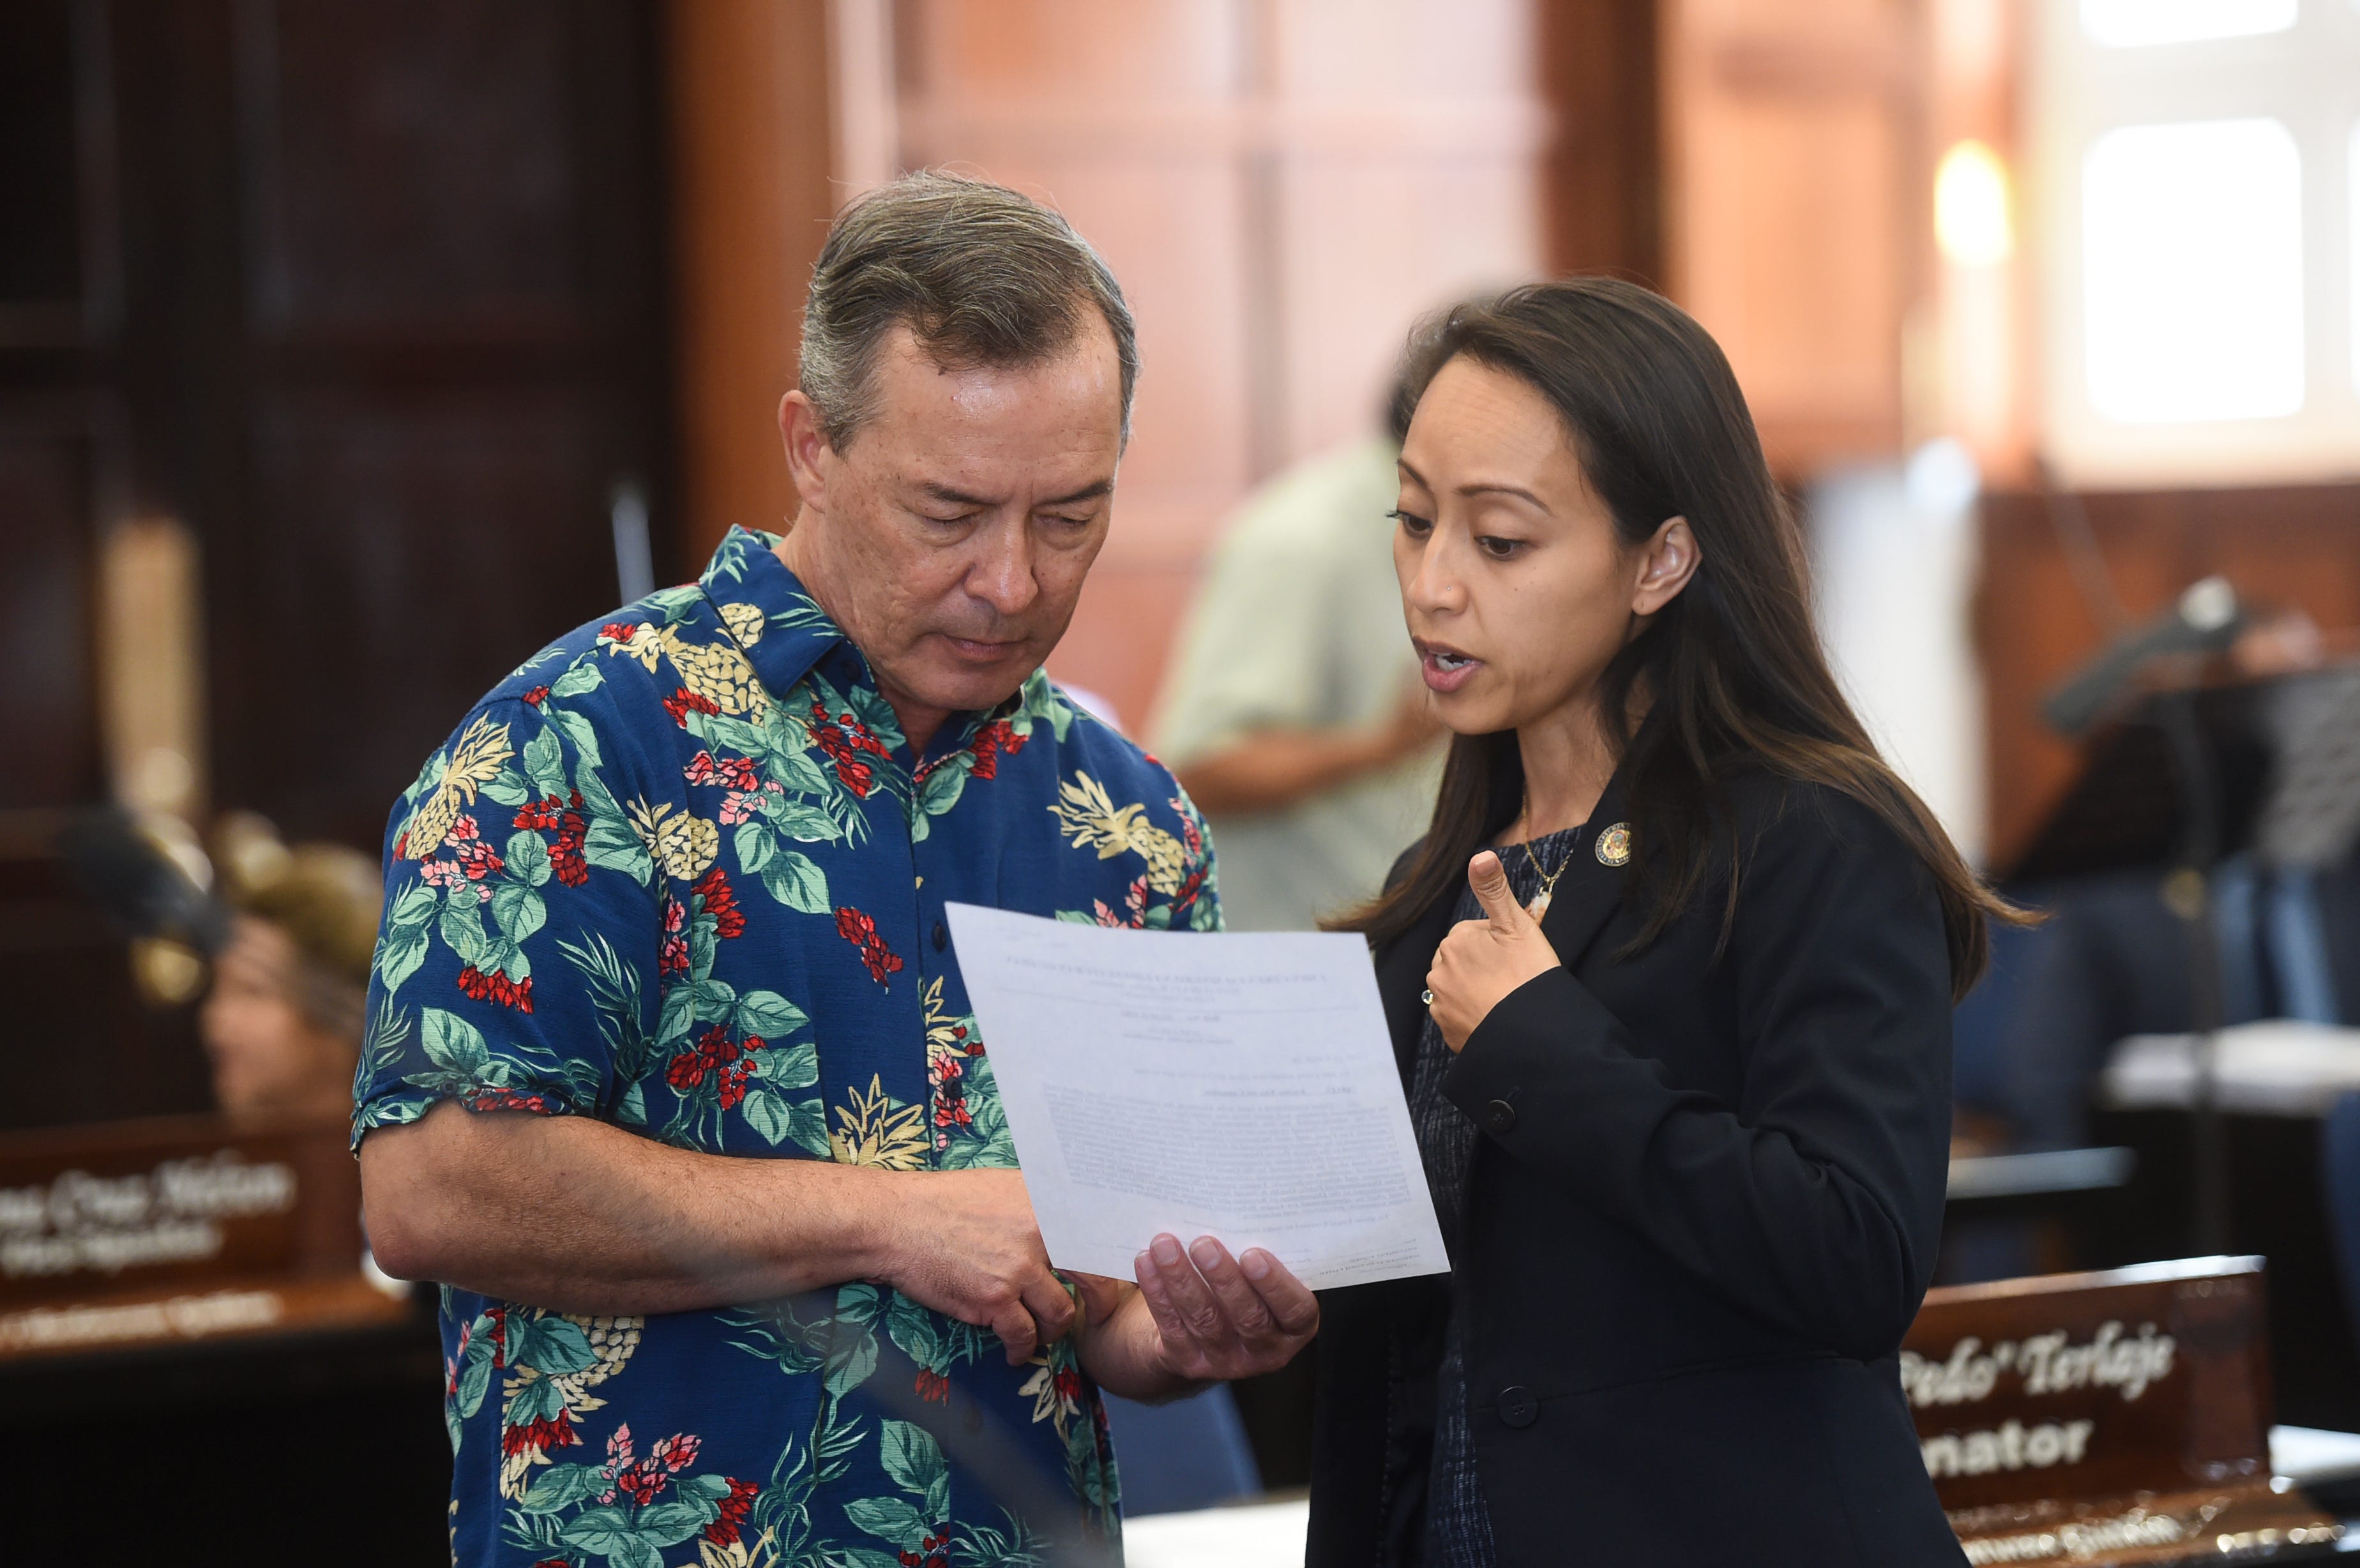 Sens. James C. Moylan and Regine Biscoe Lee during a session recess at the Guam Congress Building in Hagåtña, March 26, 2019.